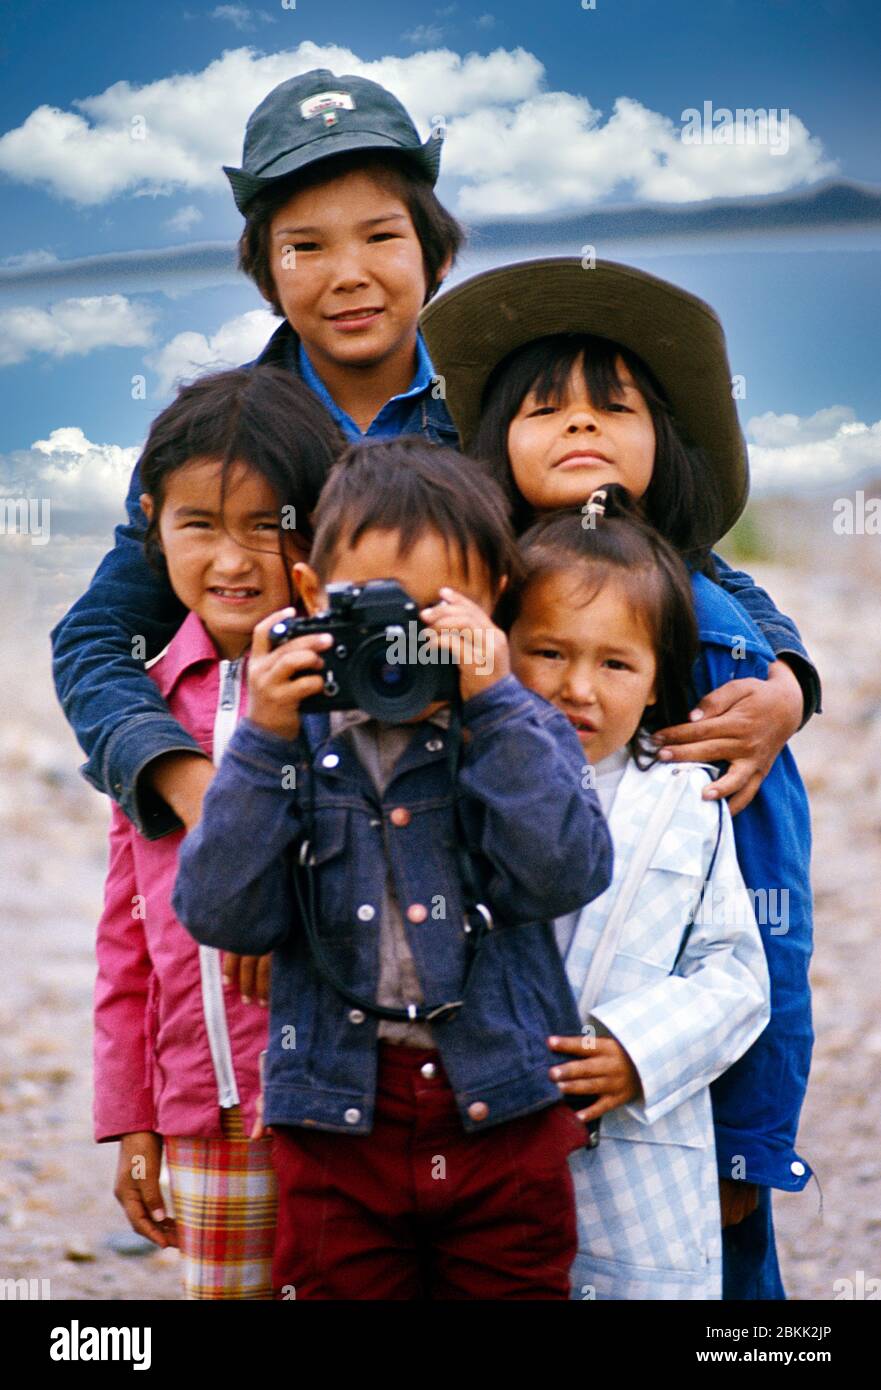 Native First Nation Children posing with camera in Winisk, Northern Ontario, Canada, North America Stock Photo